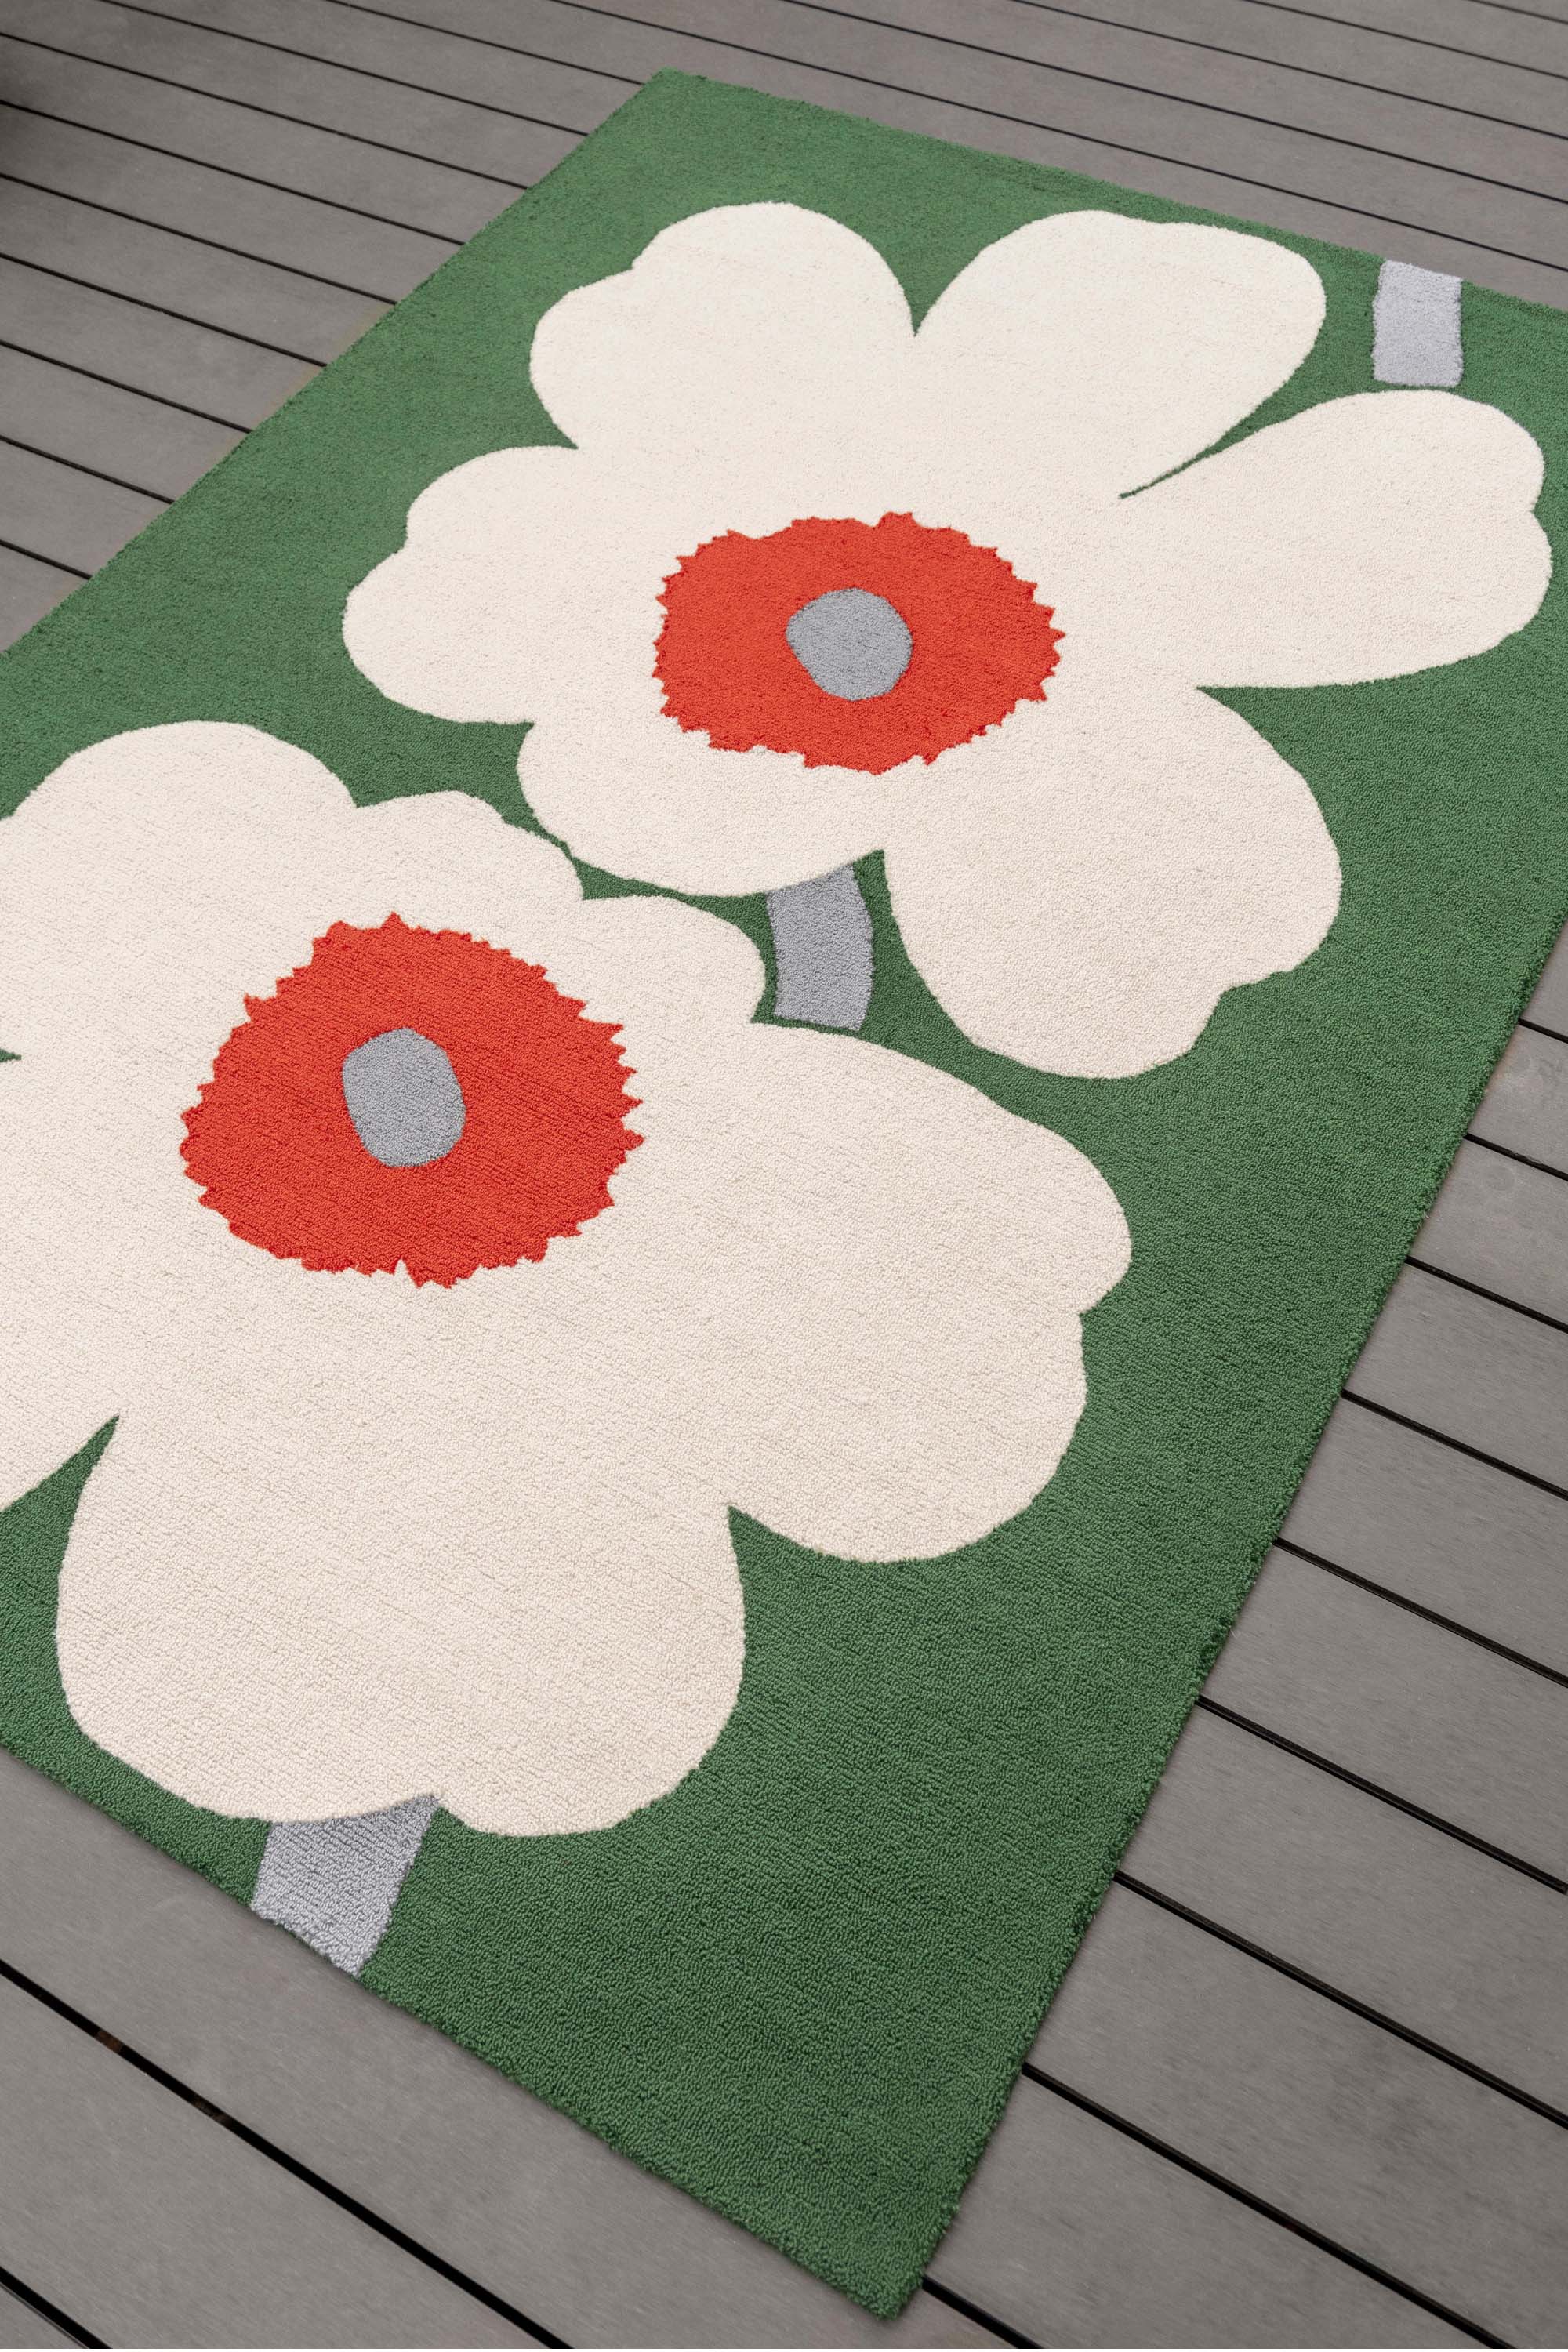 Green rug with white and orange floral motif